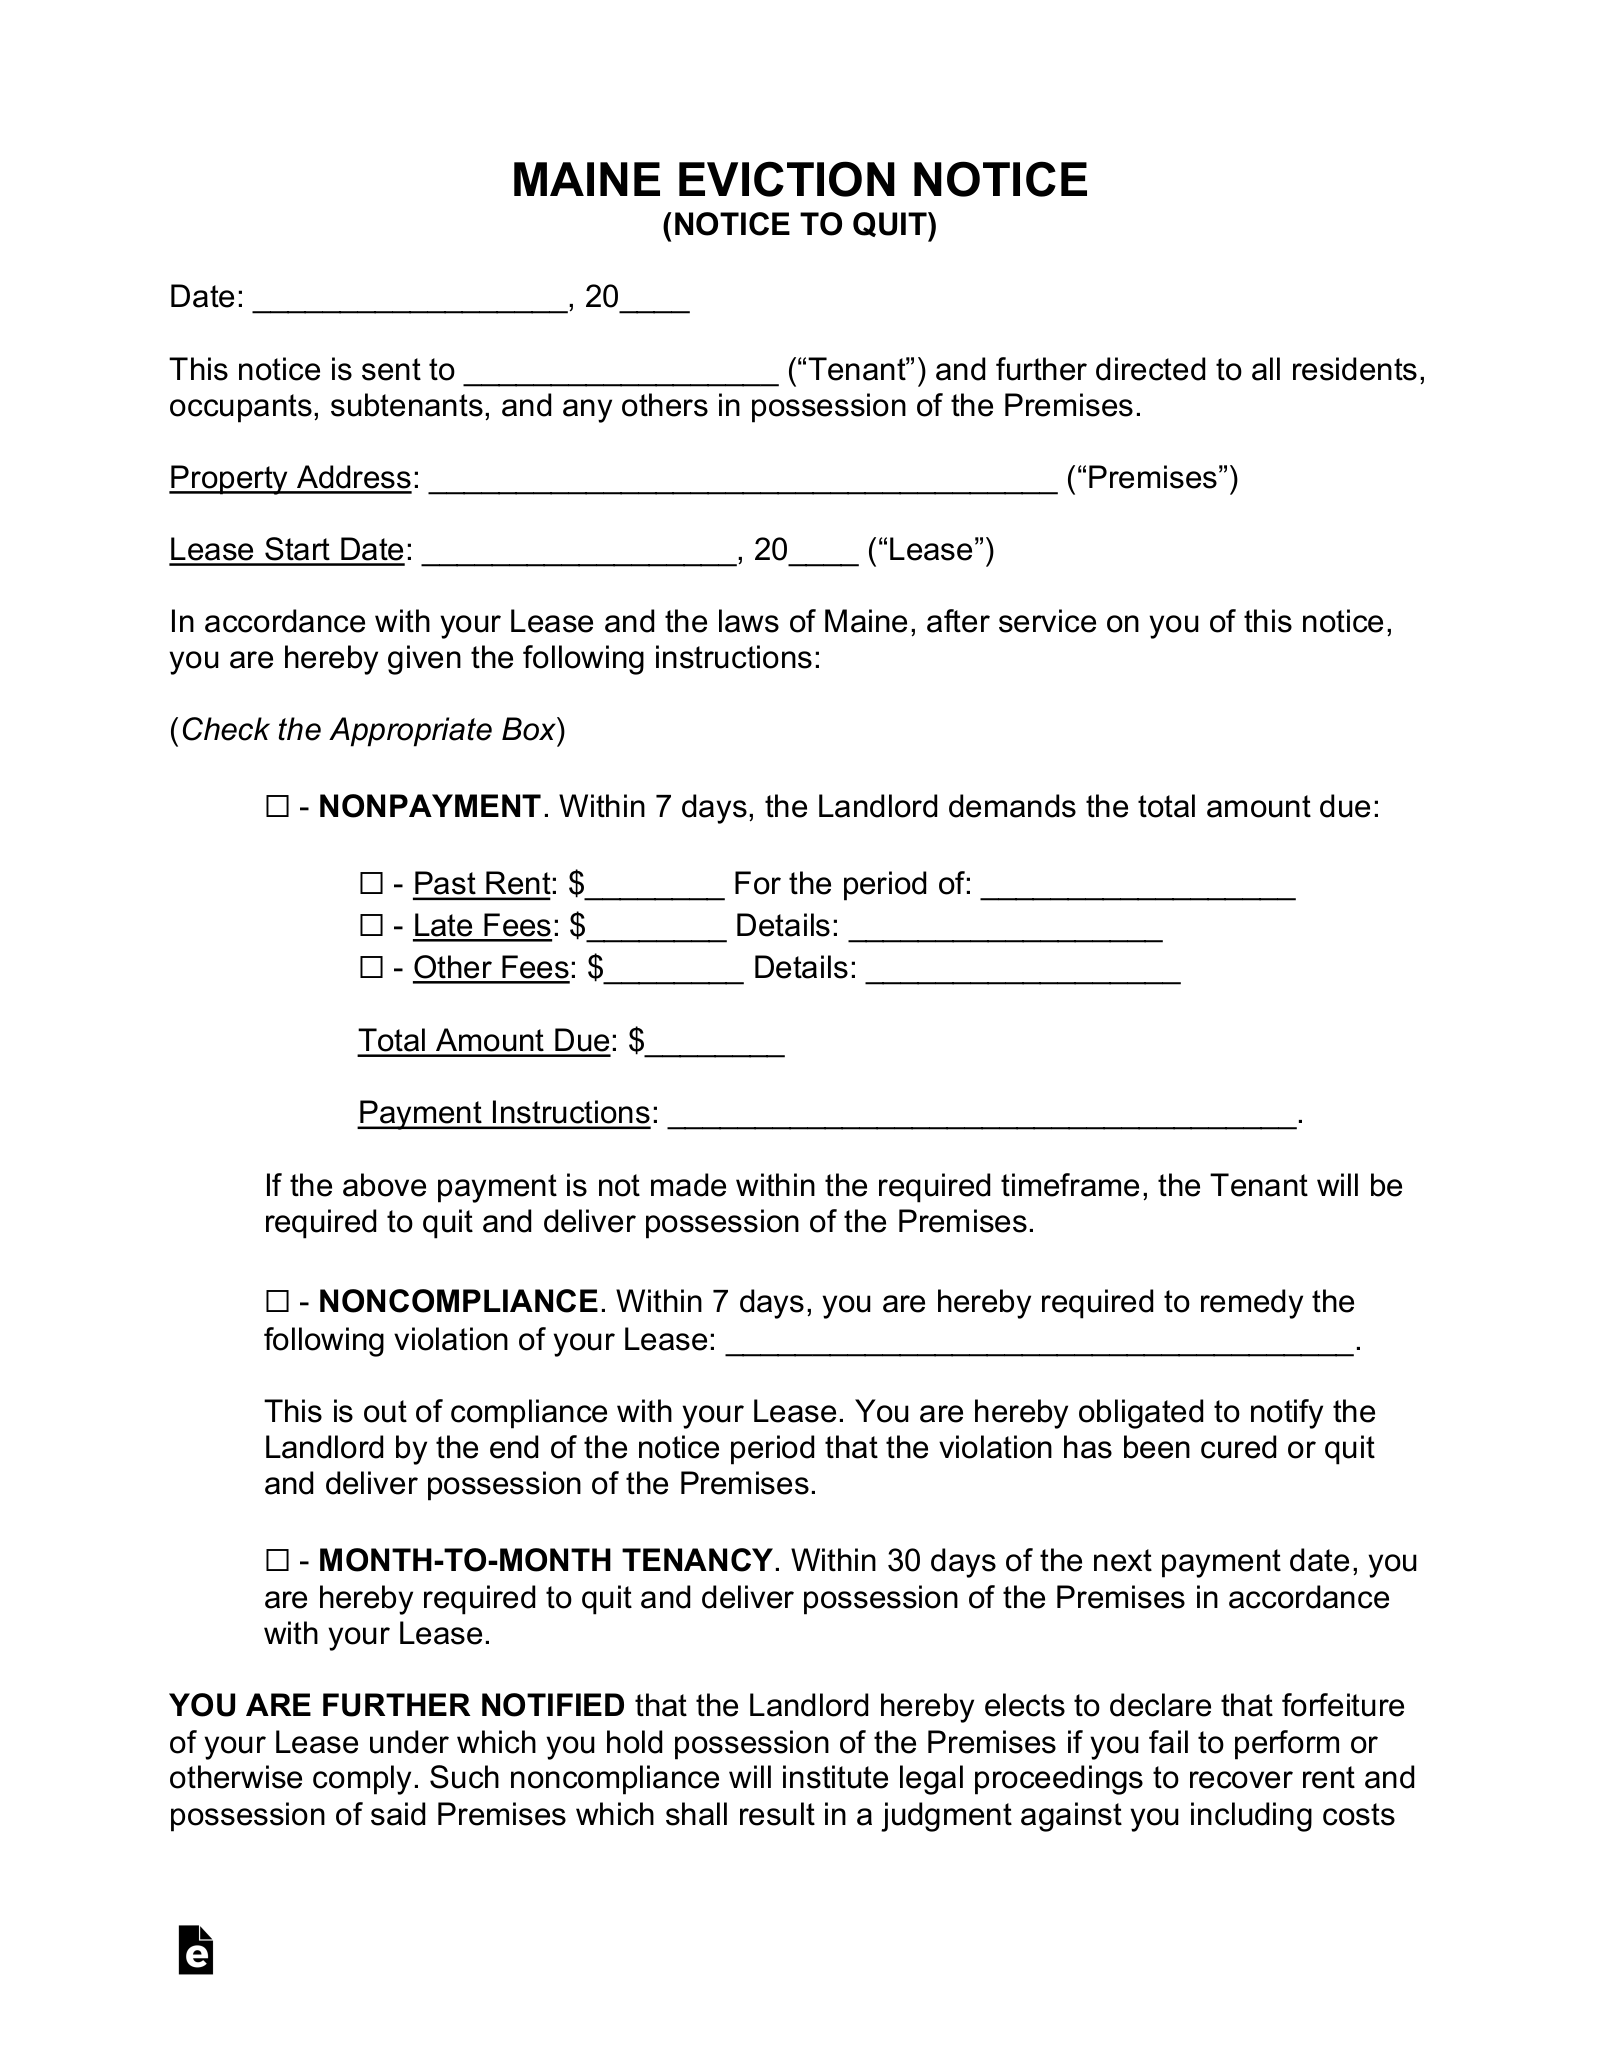 free-maine-eviction-notice-forms-3-pdf-word-eforms